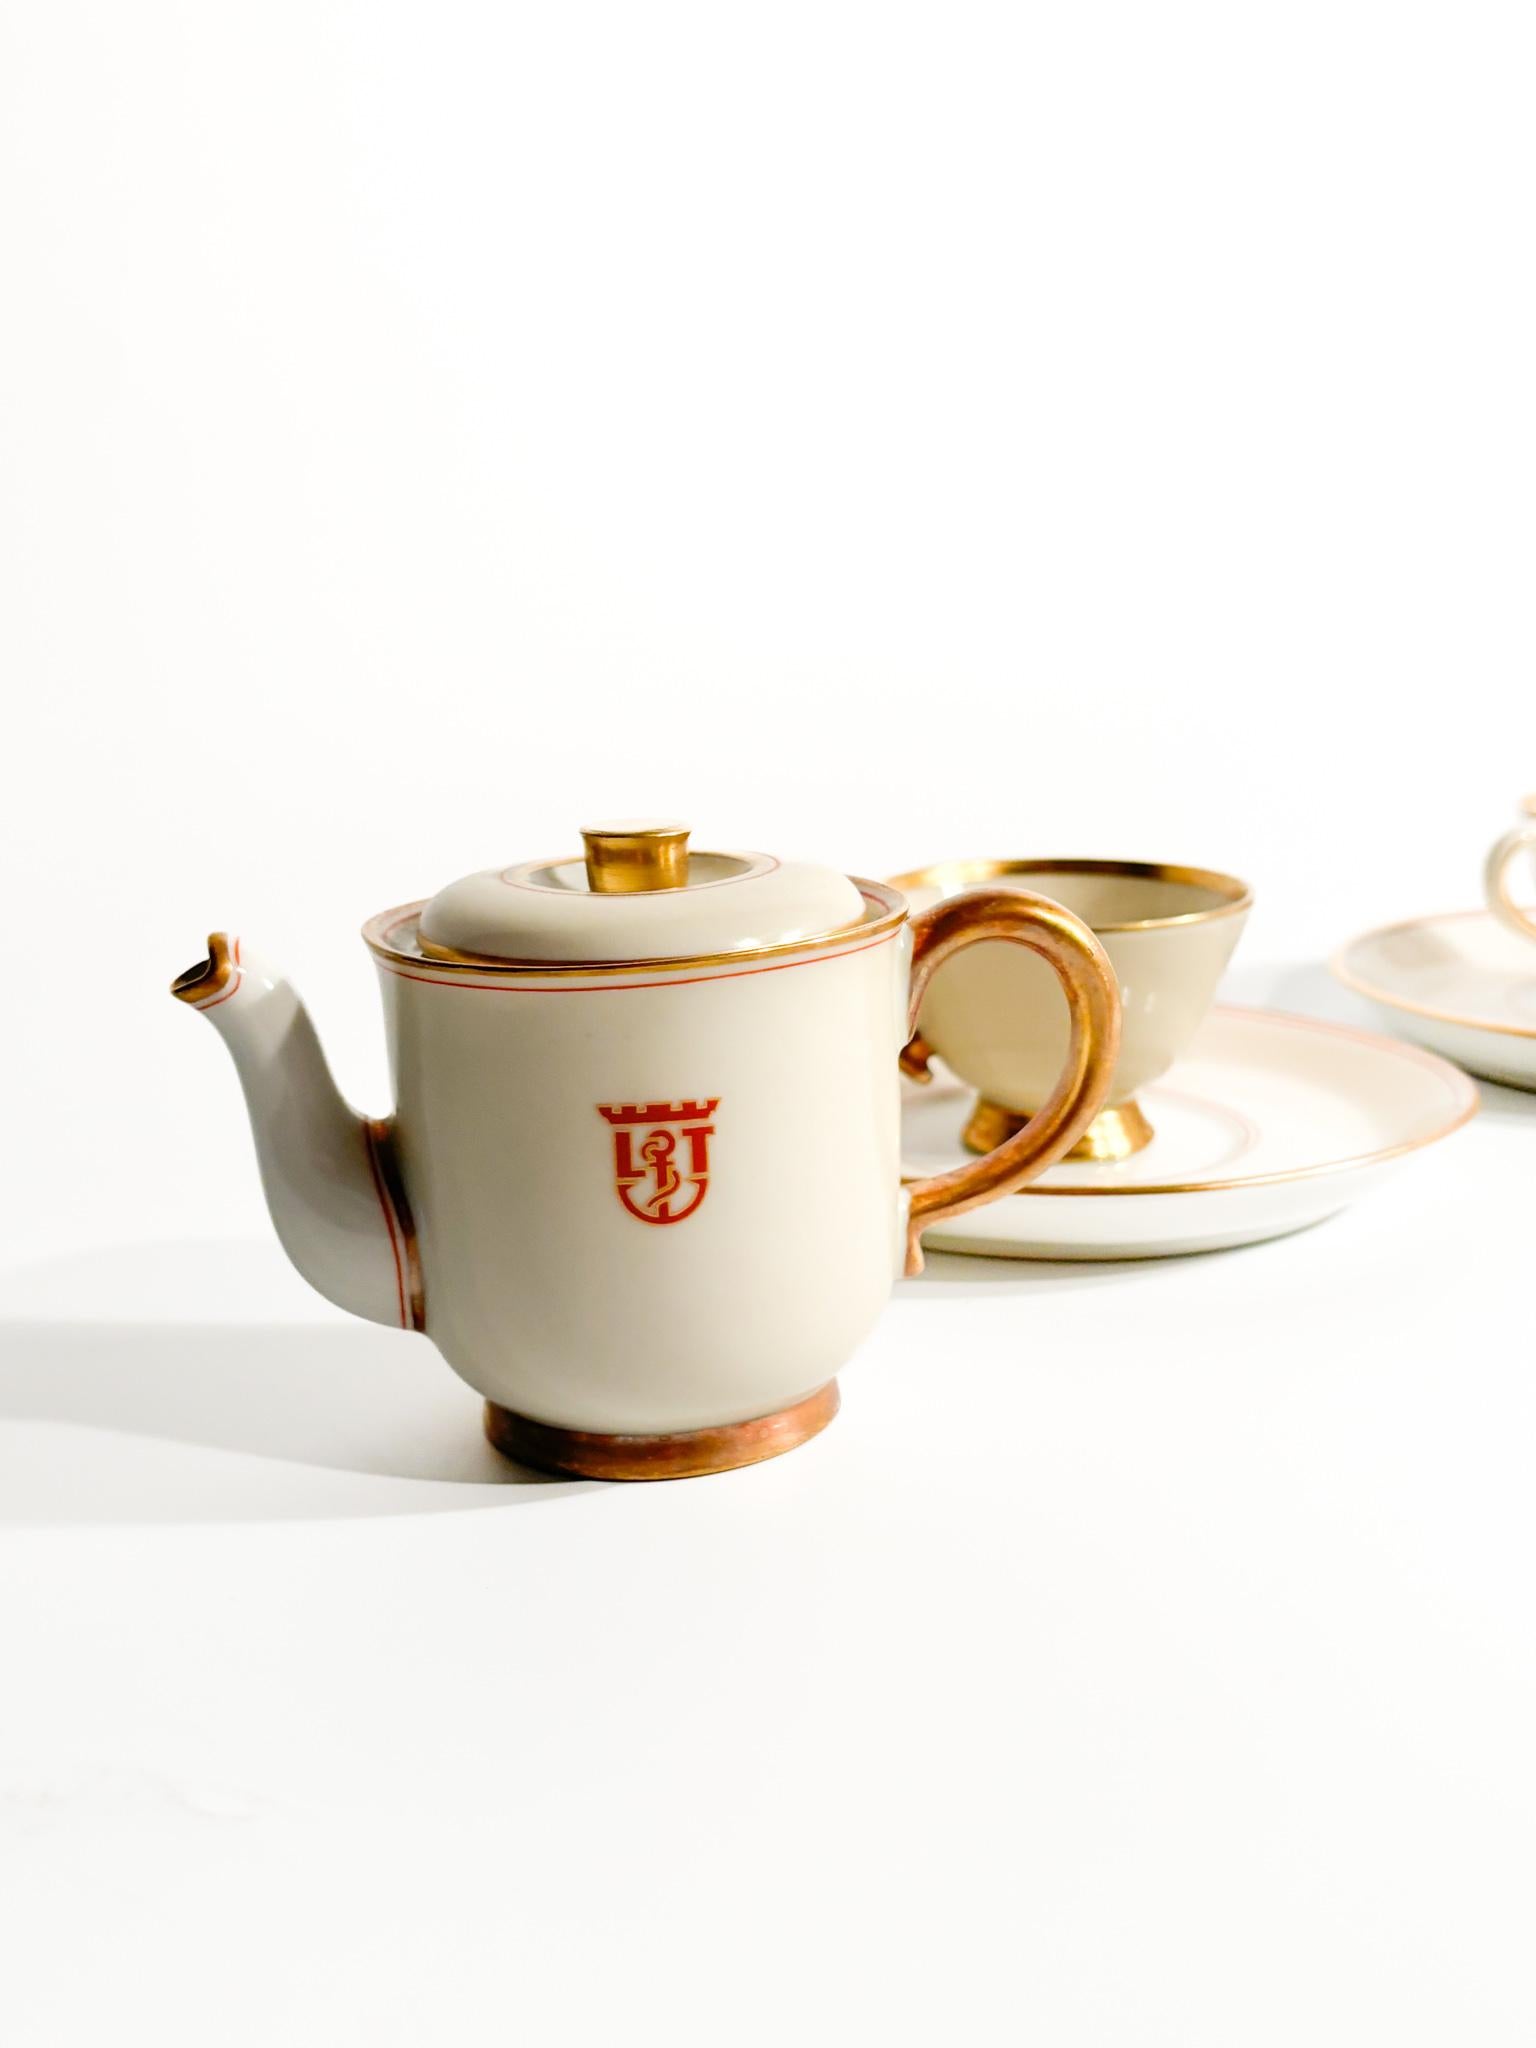 Porcelain Gio Ponti Cups and Coffee Pot Designed for the Victoria Lloyd Triestino Ship  For Sale